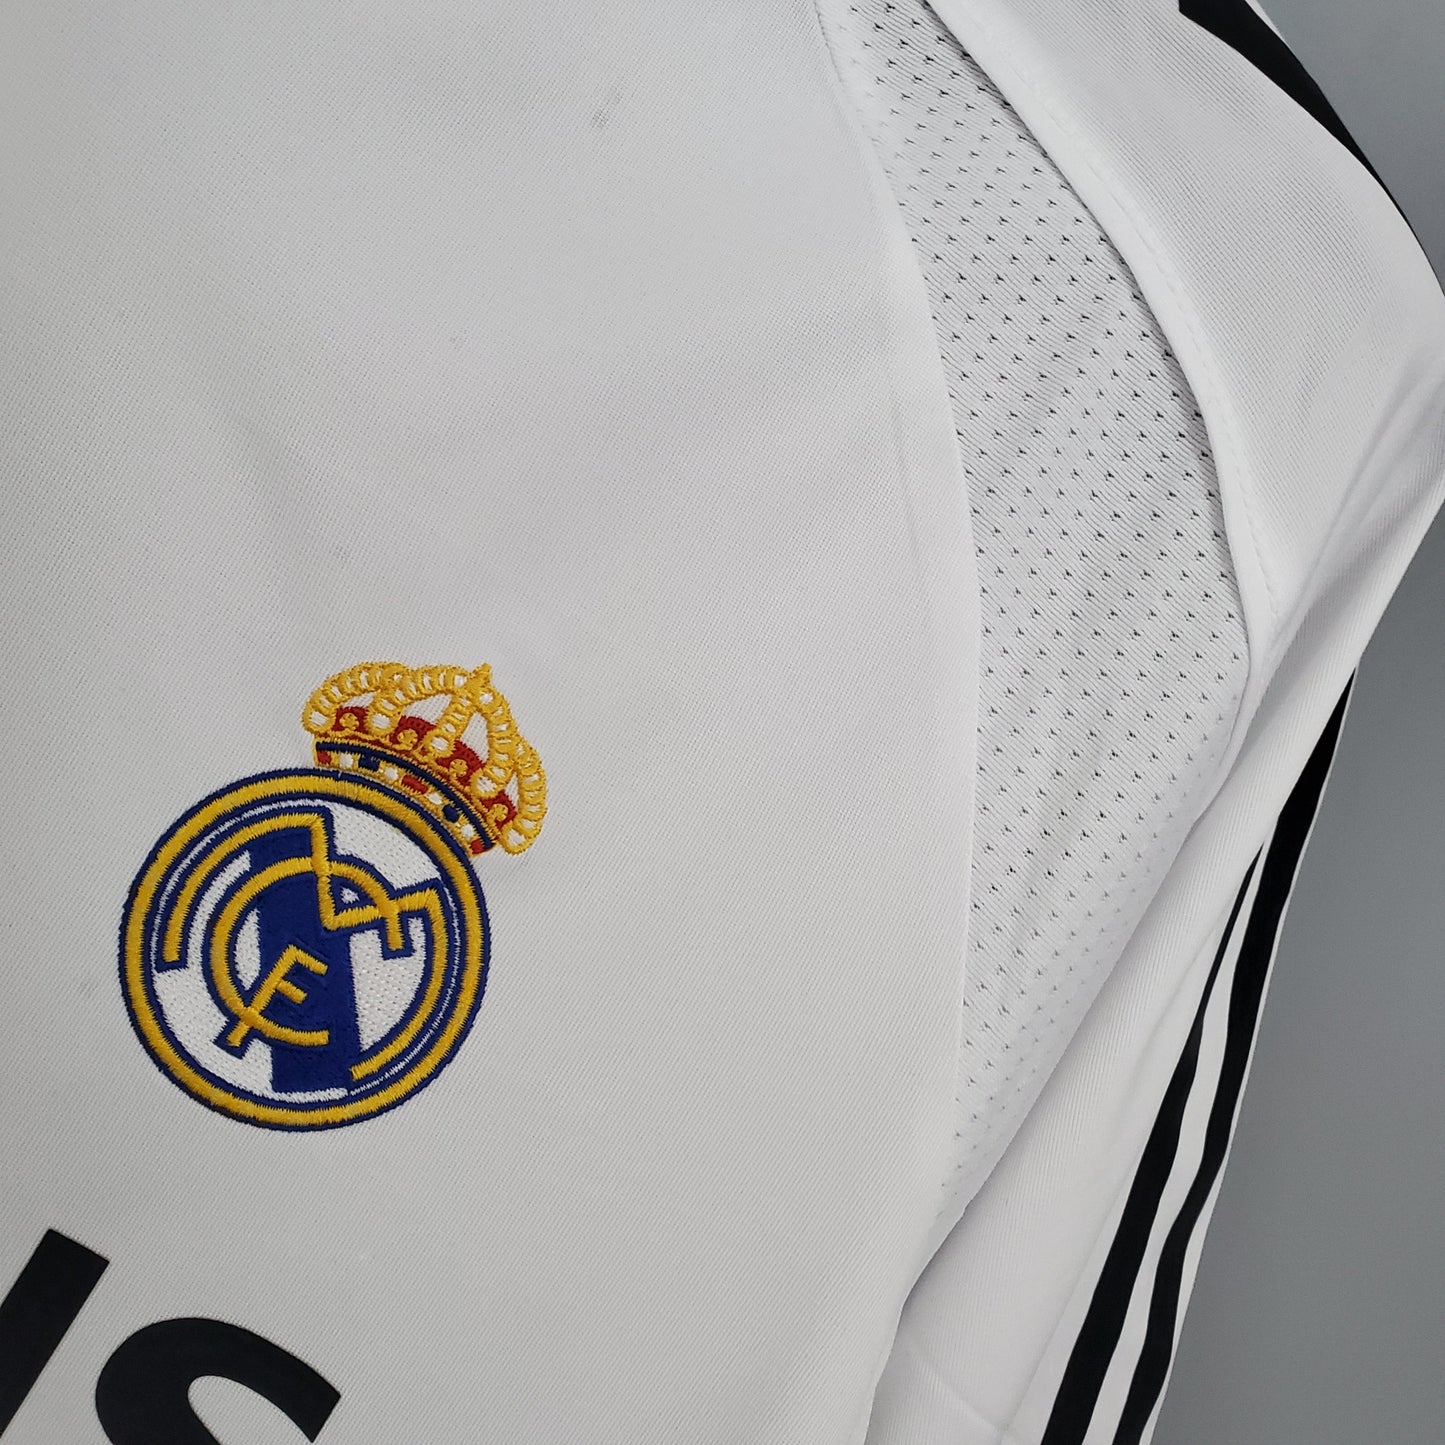 REAL MADRID 2005 - 2006 HOME JERSEY